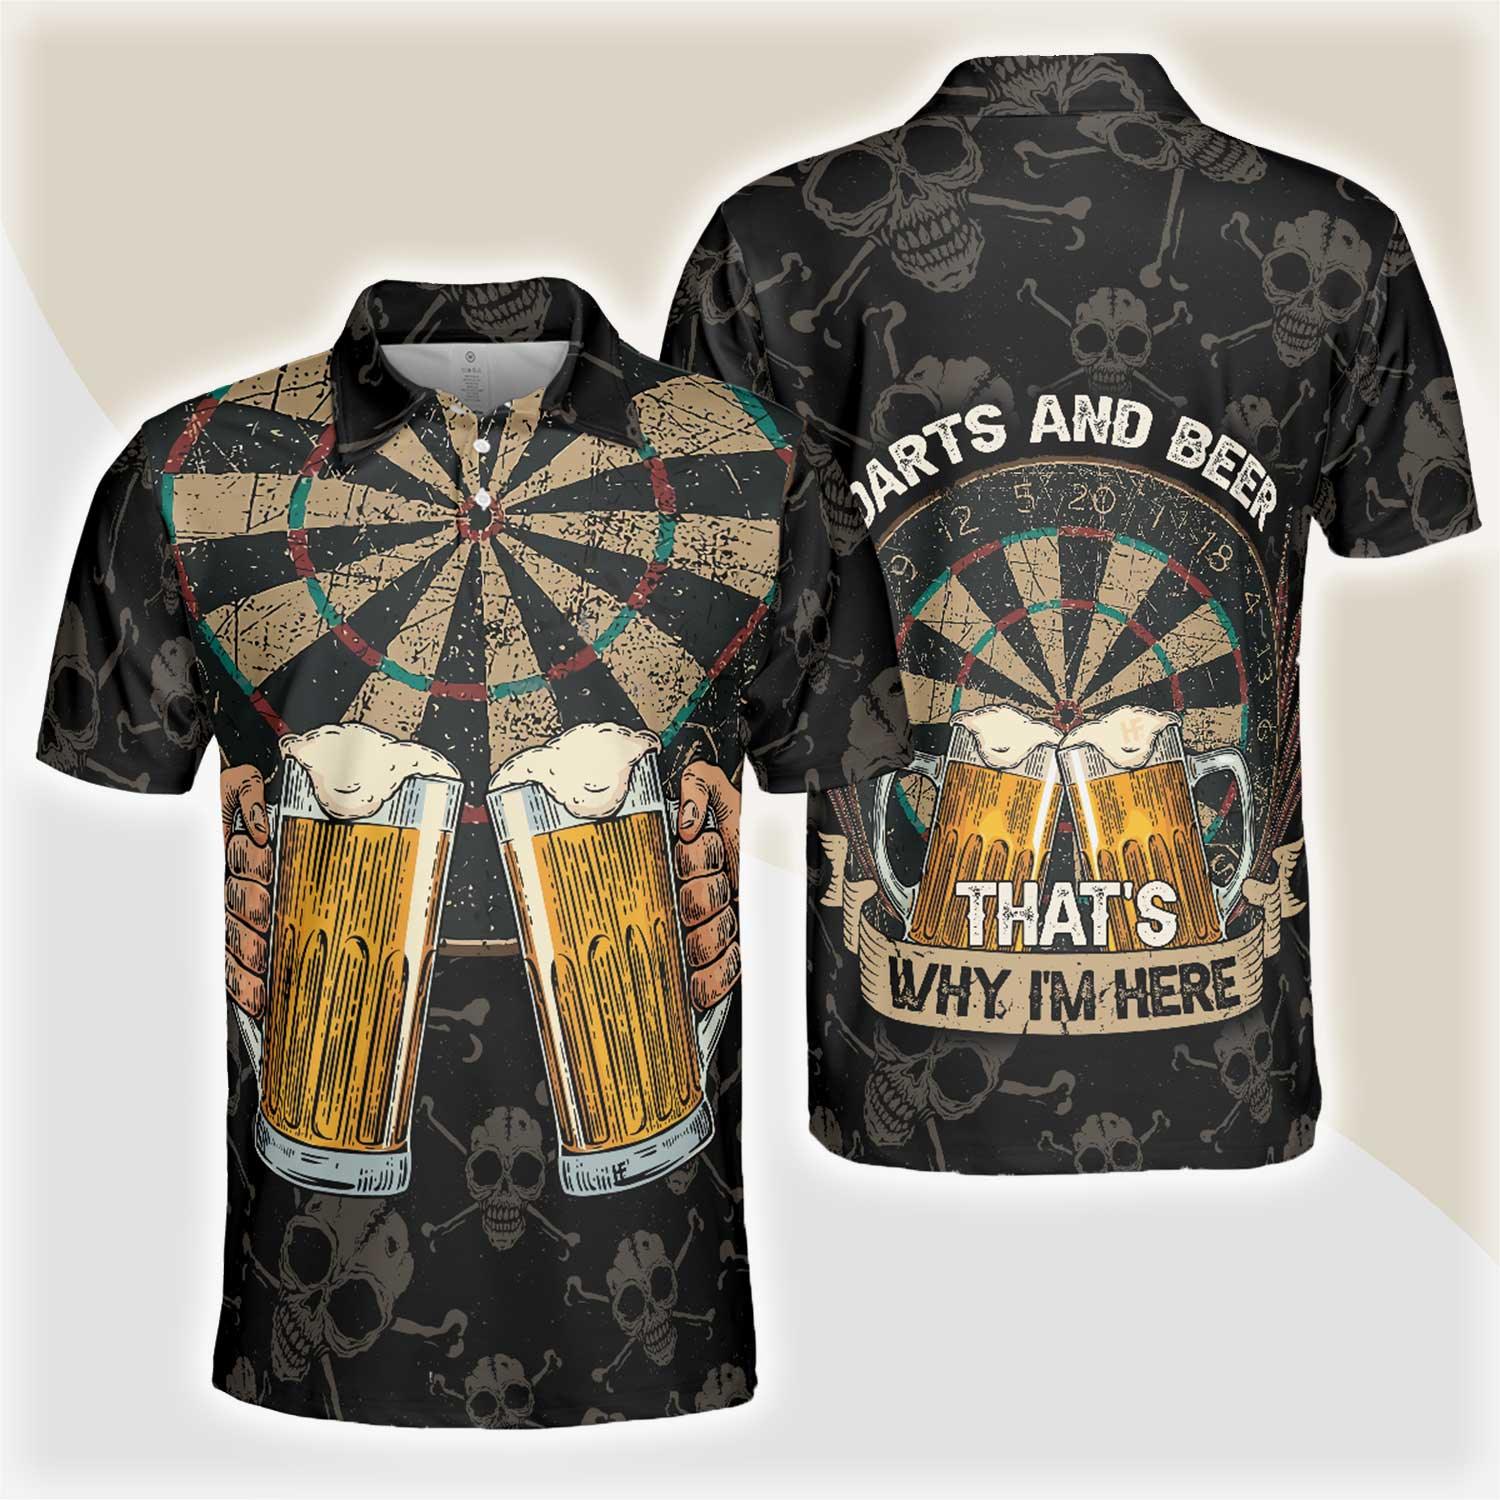 Darts And Beer That's Why I'm Here Short Sleeve Polo Shirt, Skull Darts Print Shirt For Men, Best Gift For Dart Lover - Amzanimalsgift